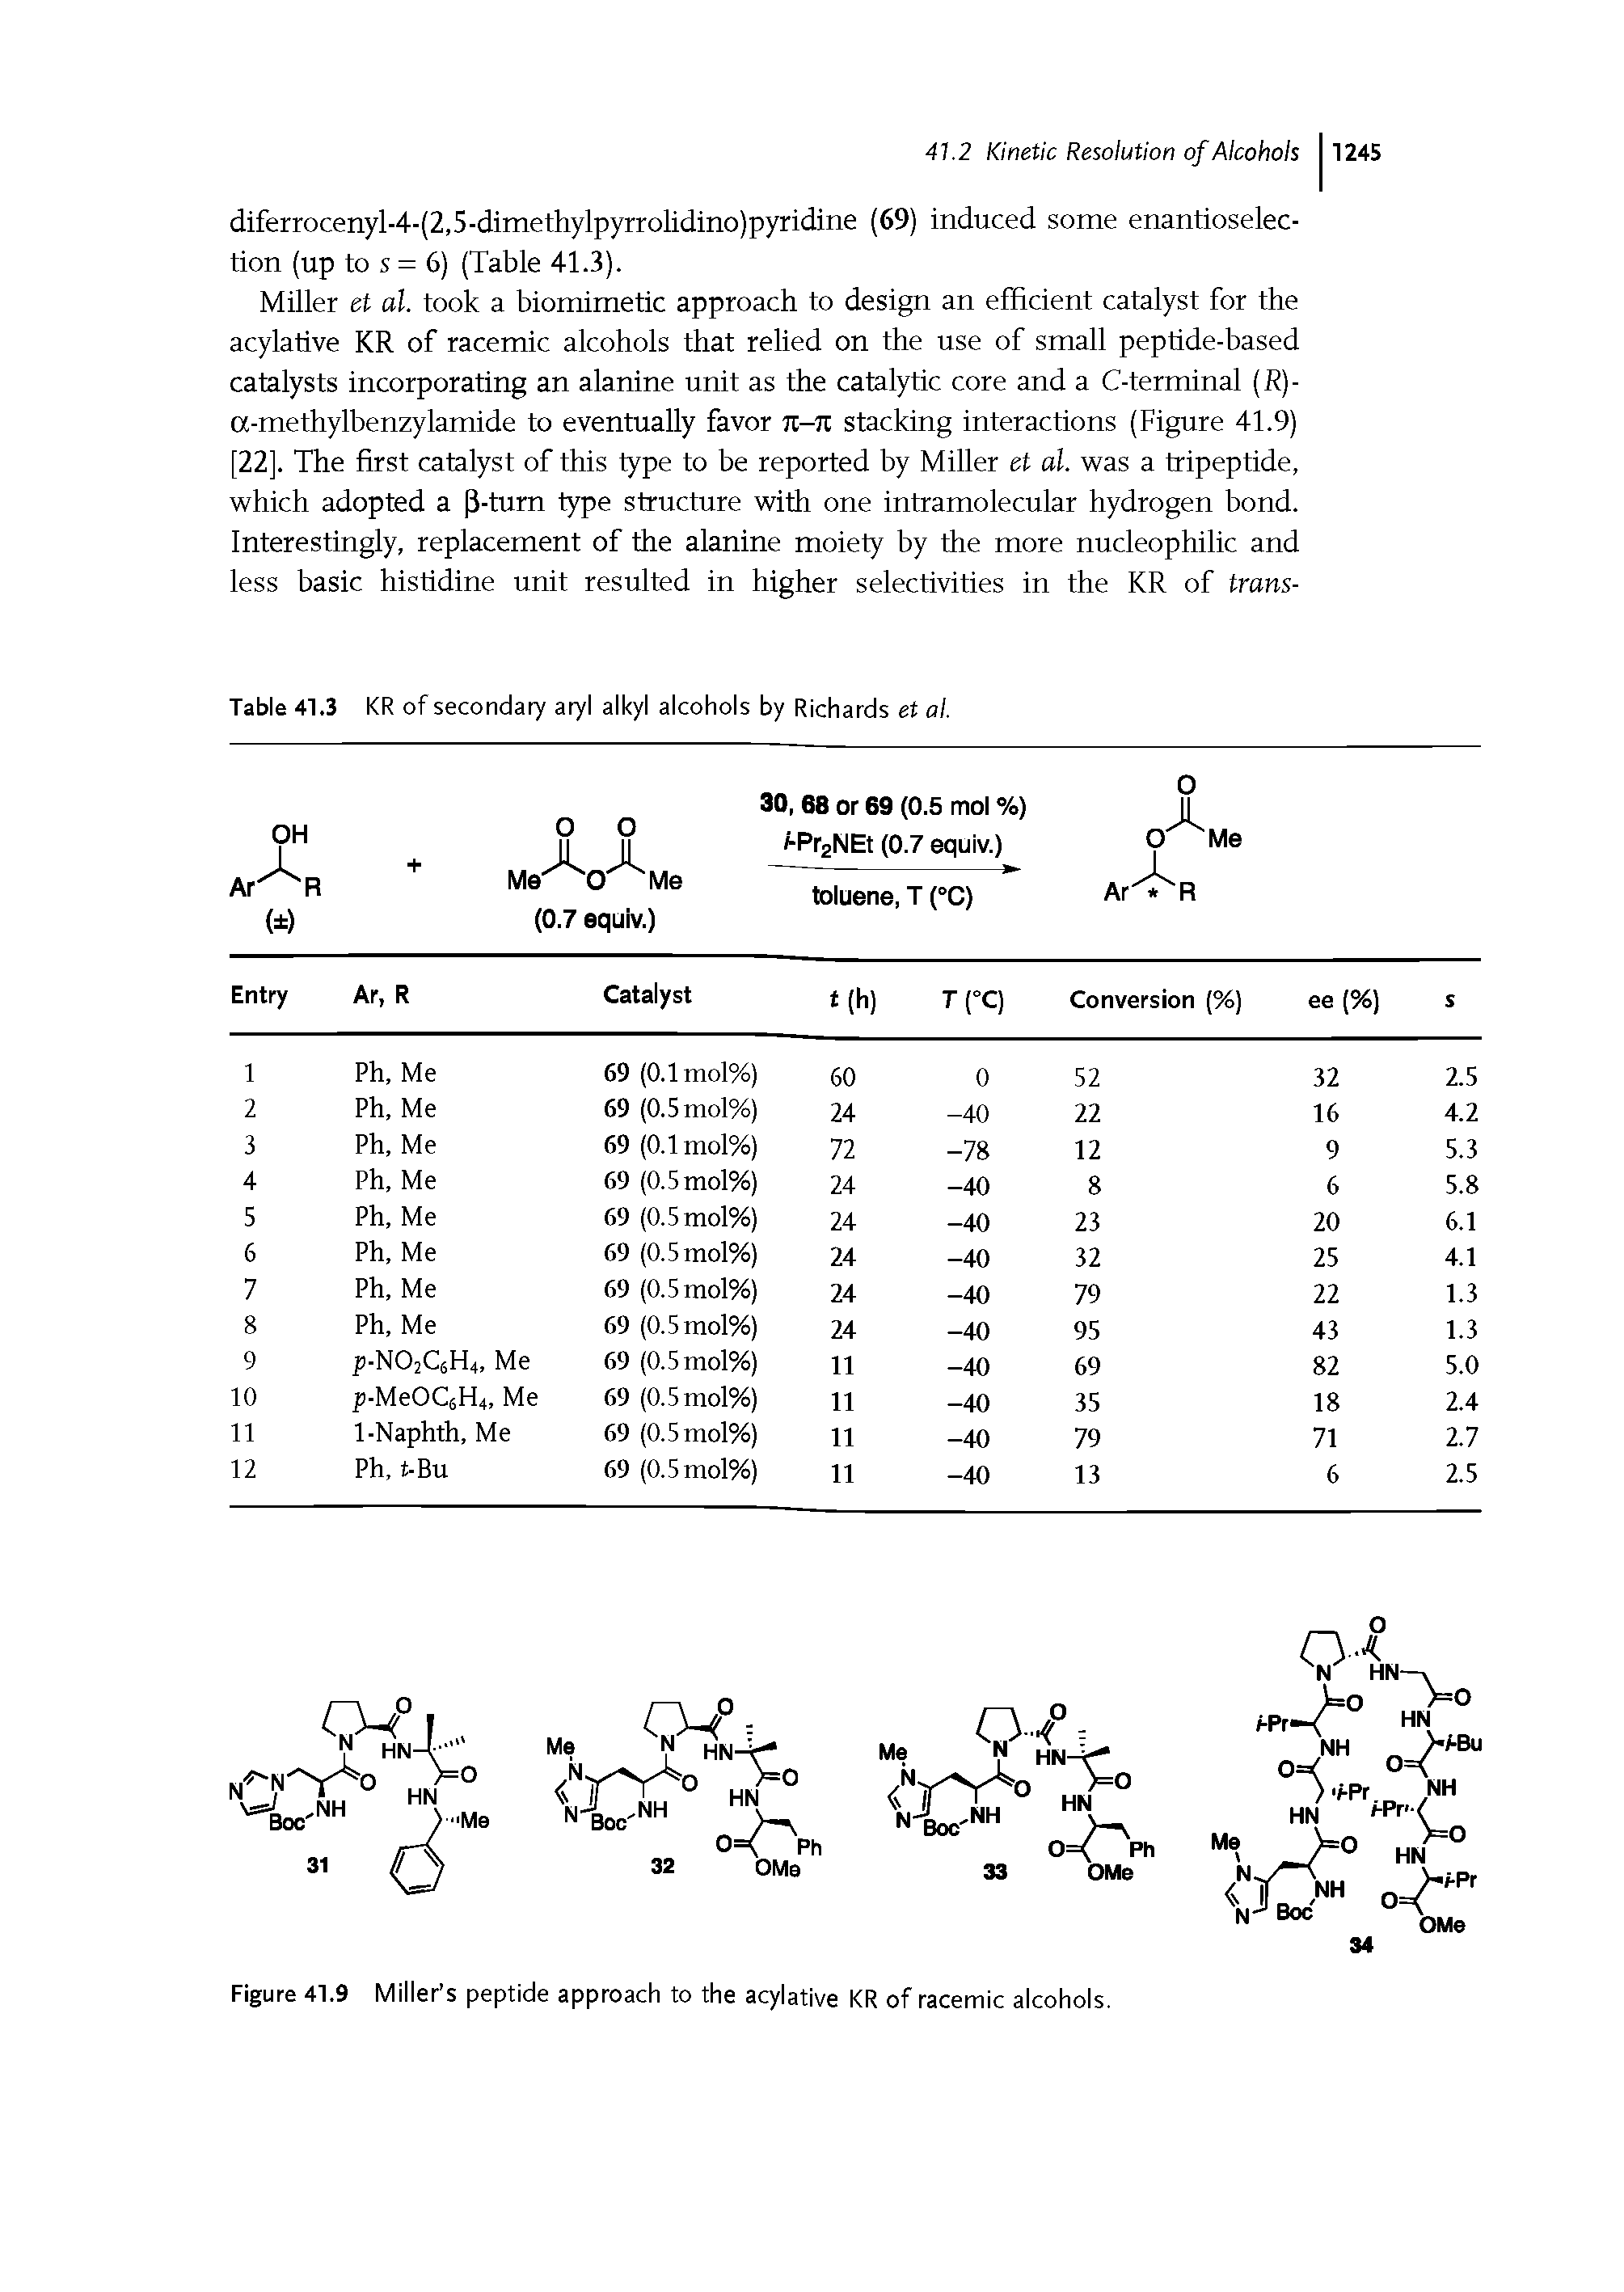 Table 41.3 KR of secondary aryl alkyl alcohols by Richards et al...